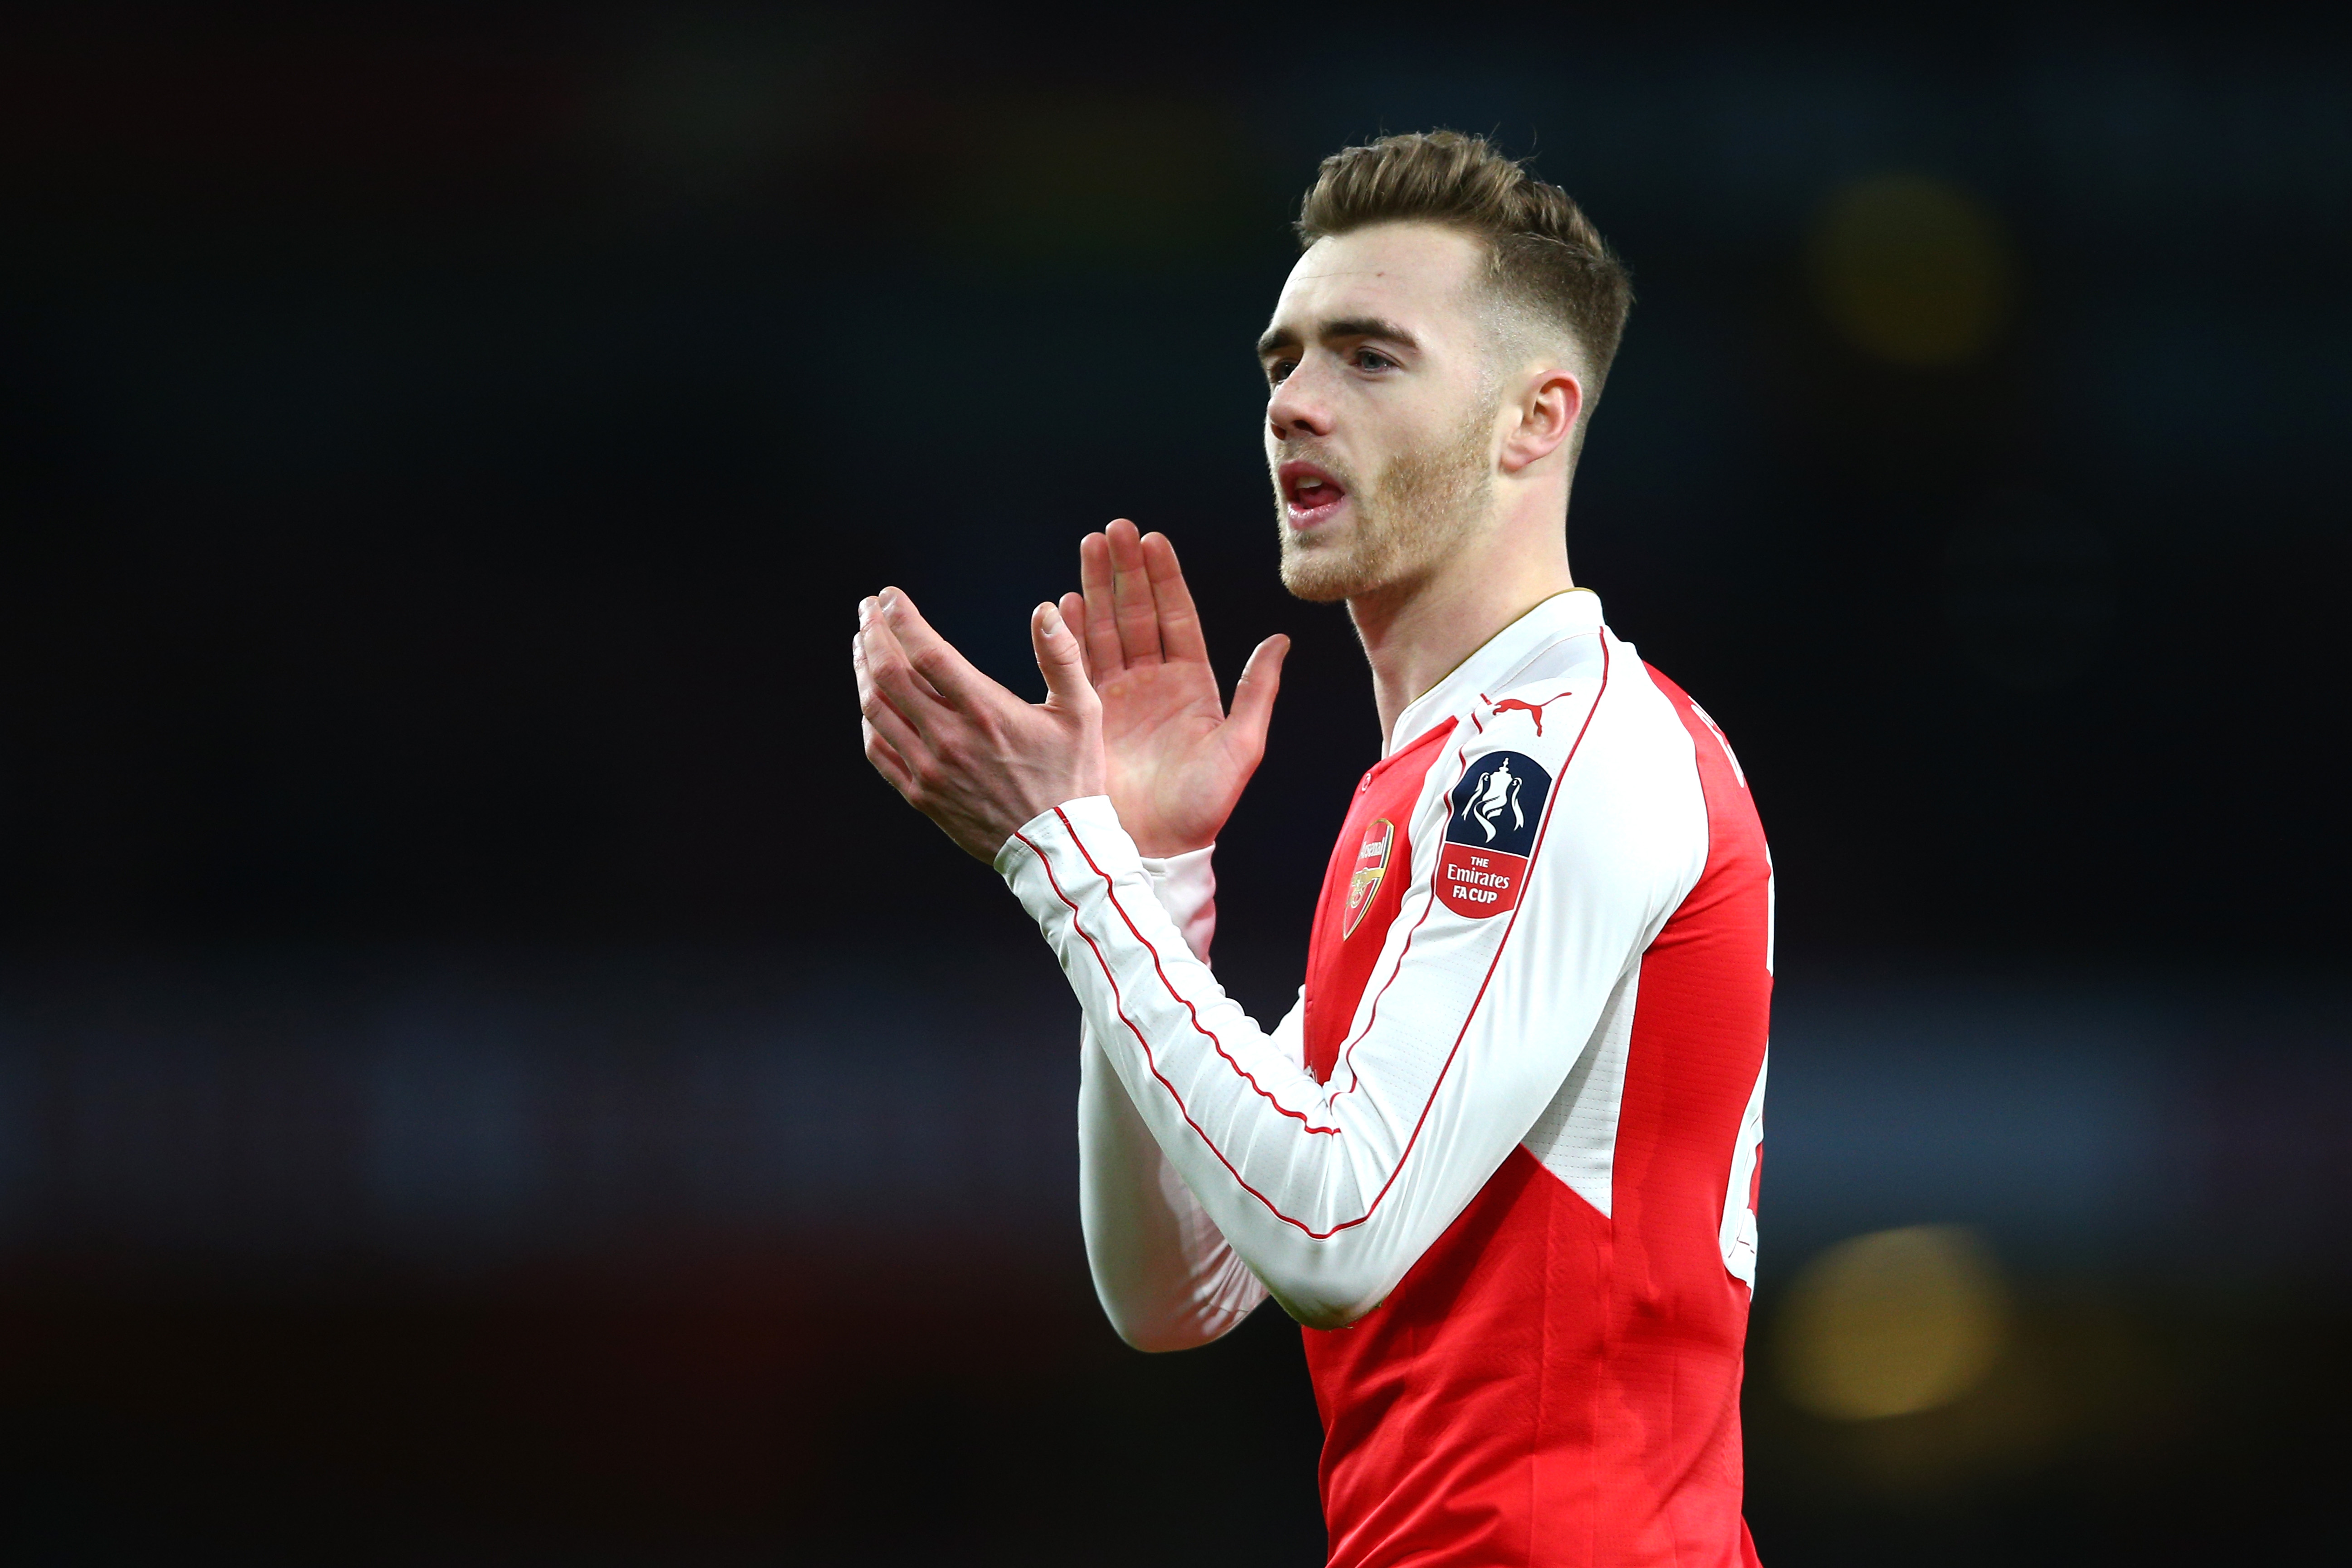 Has Chambers played his last game for Arsenal? (Photo courtesy - Paul Gilham/Getty Images)